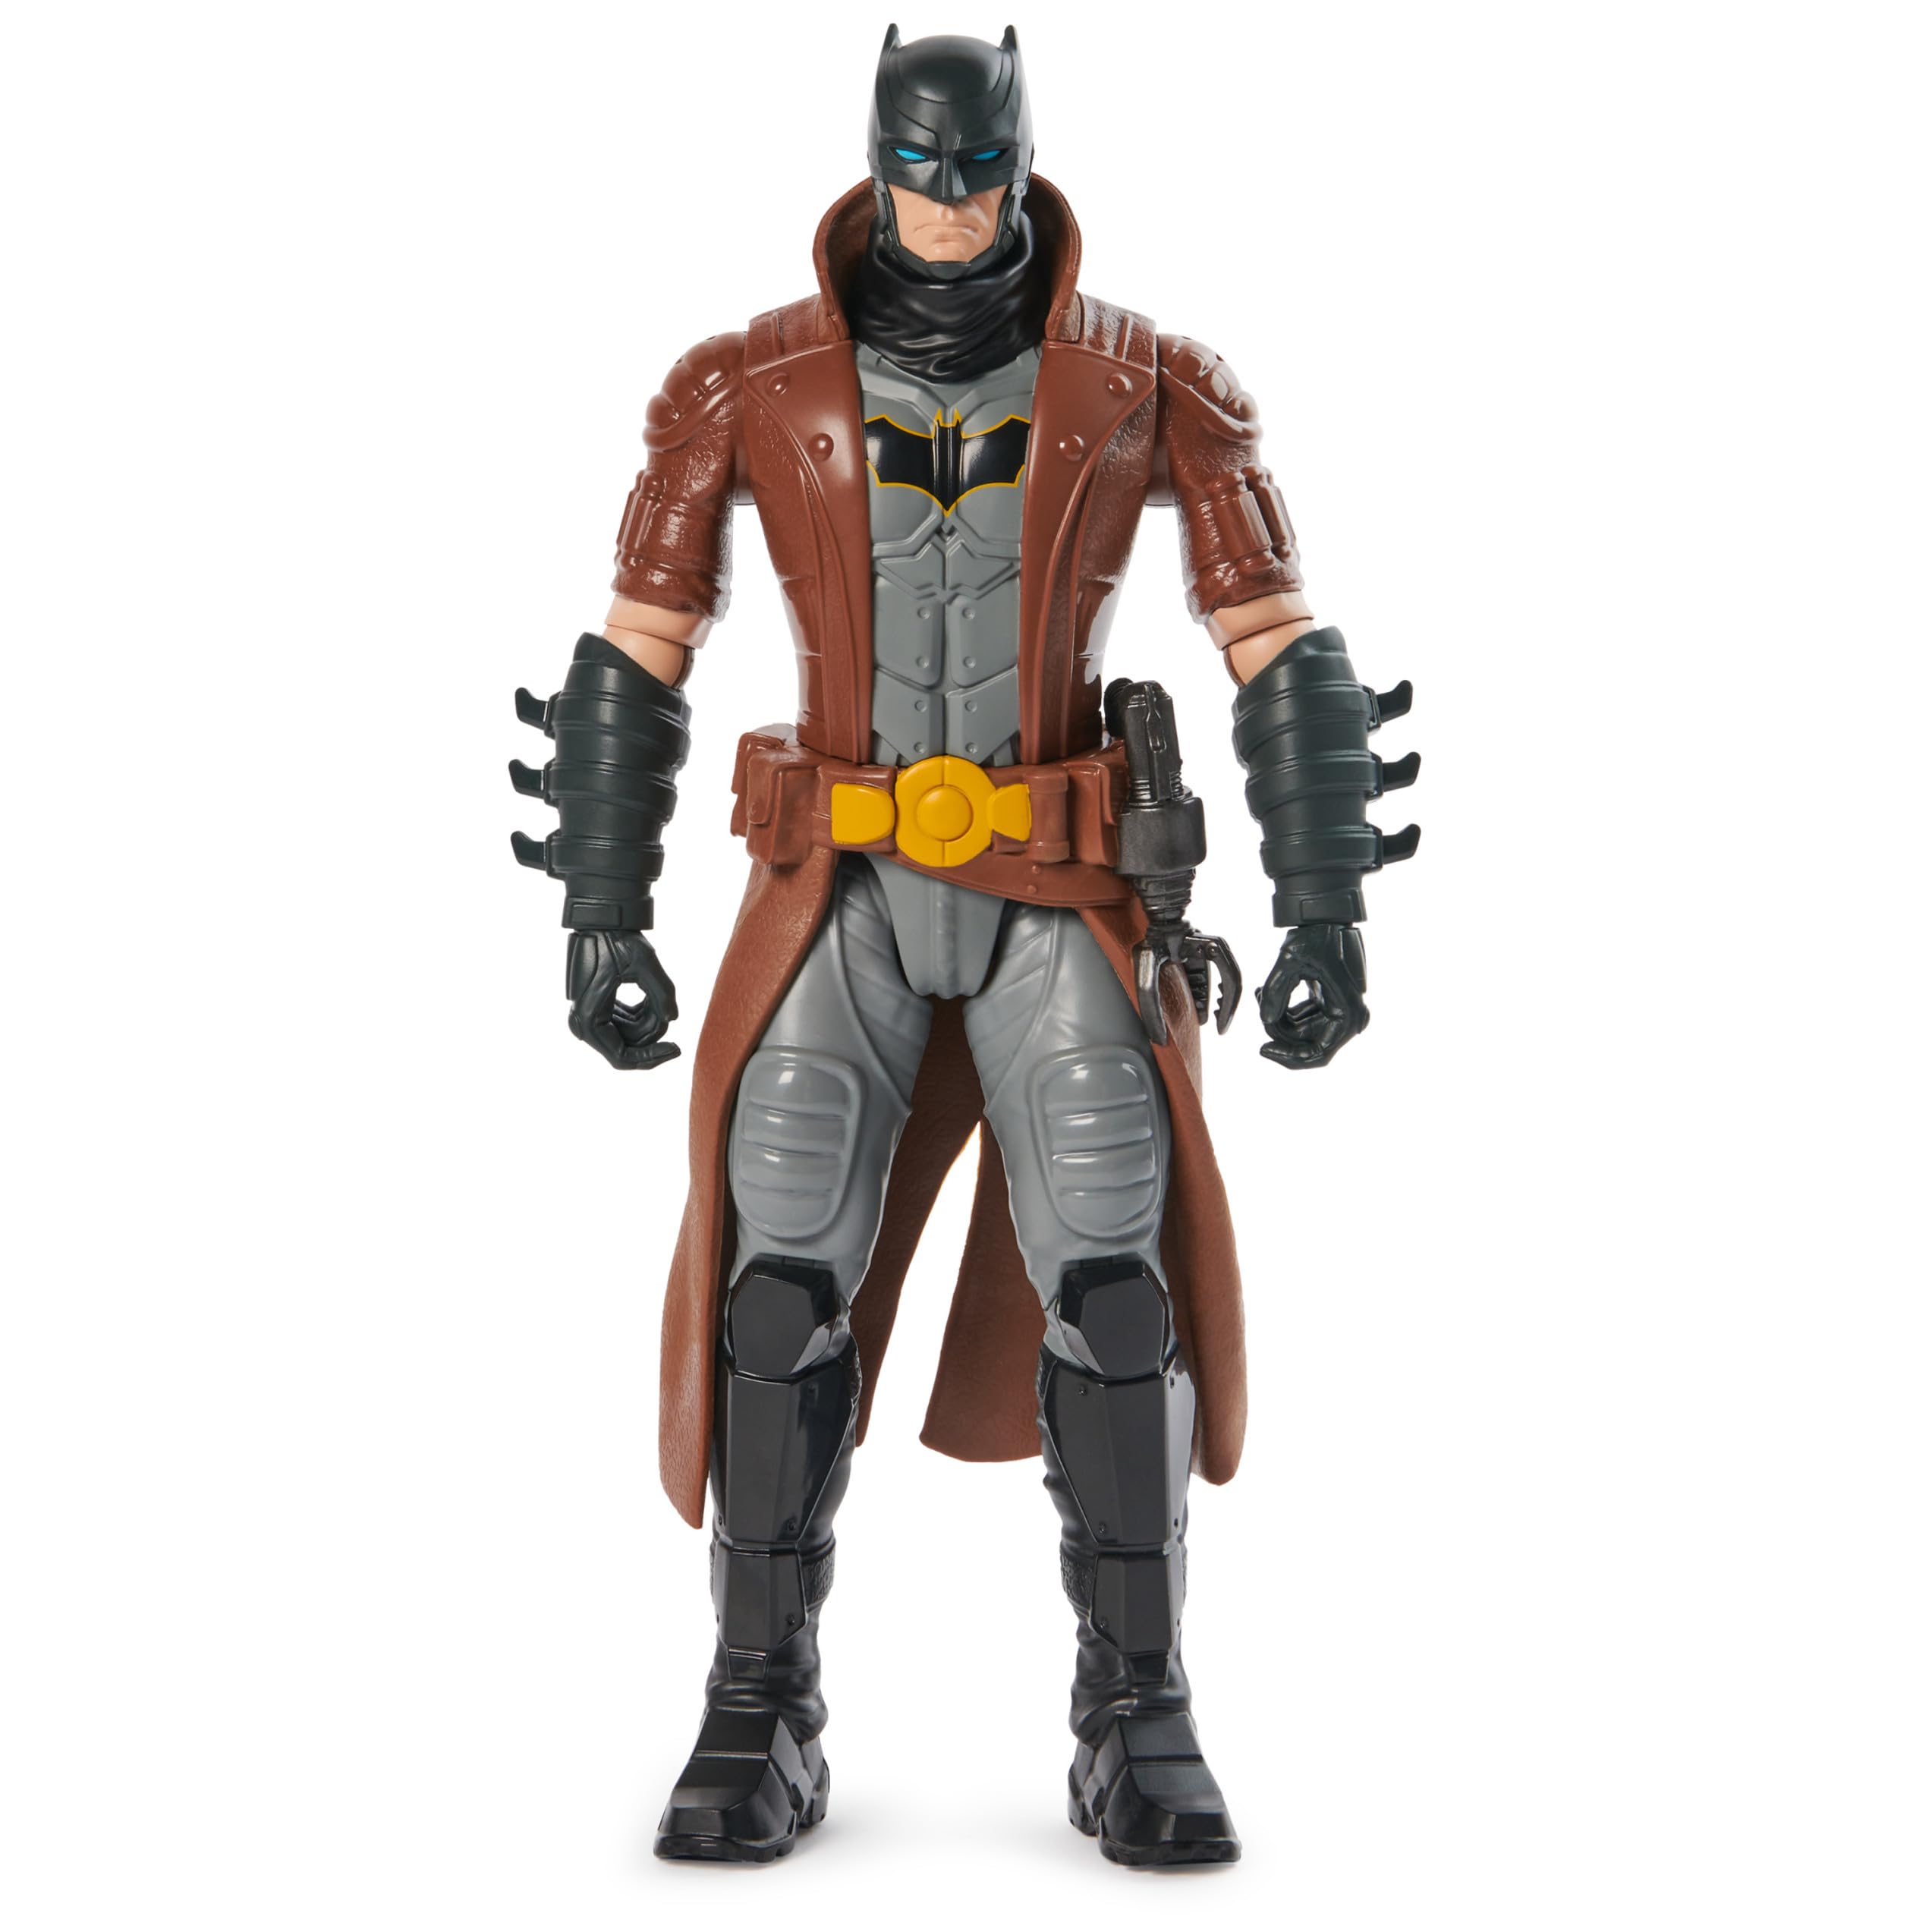 DC Comics, Batman Action Figure, 12-inch, Kids Toys for Boys and Girls, Ages 3+